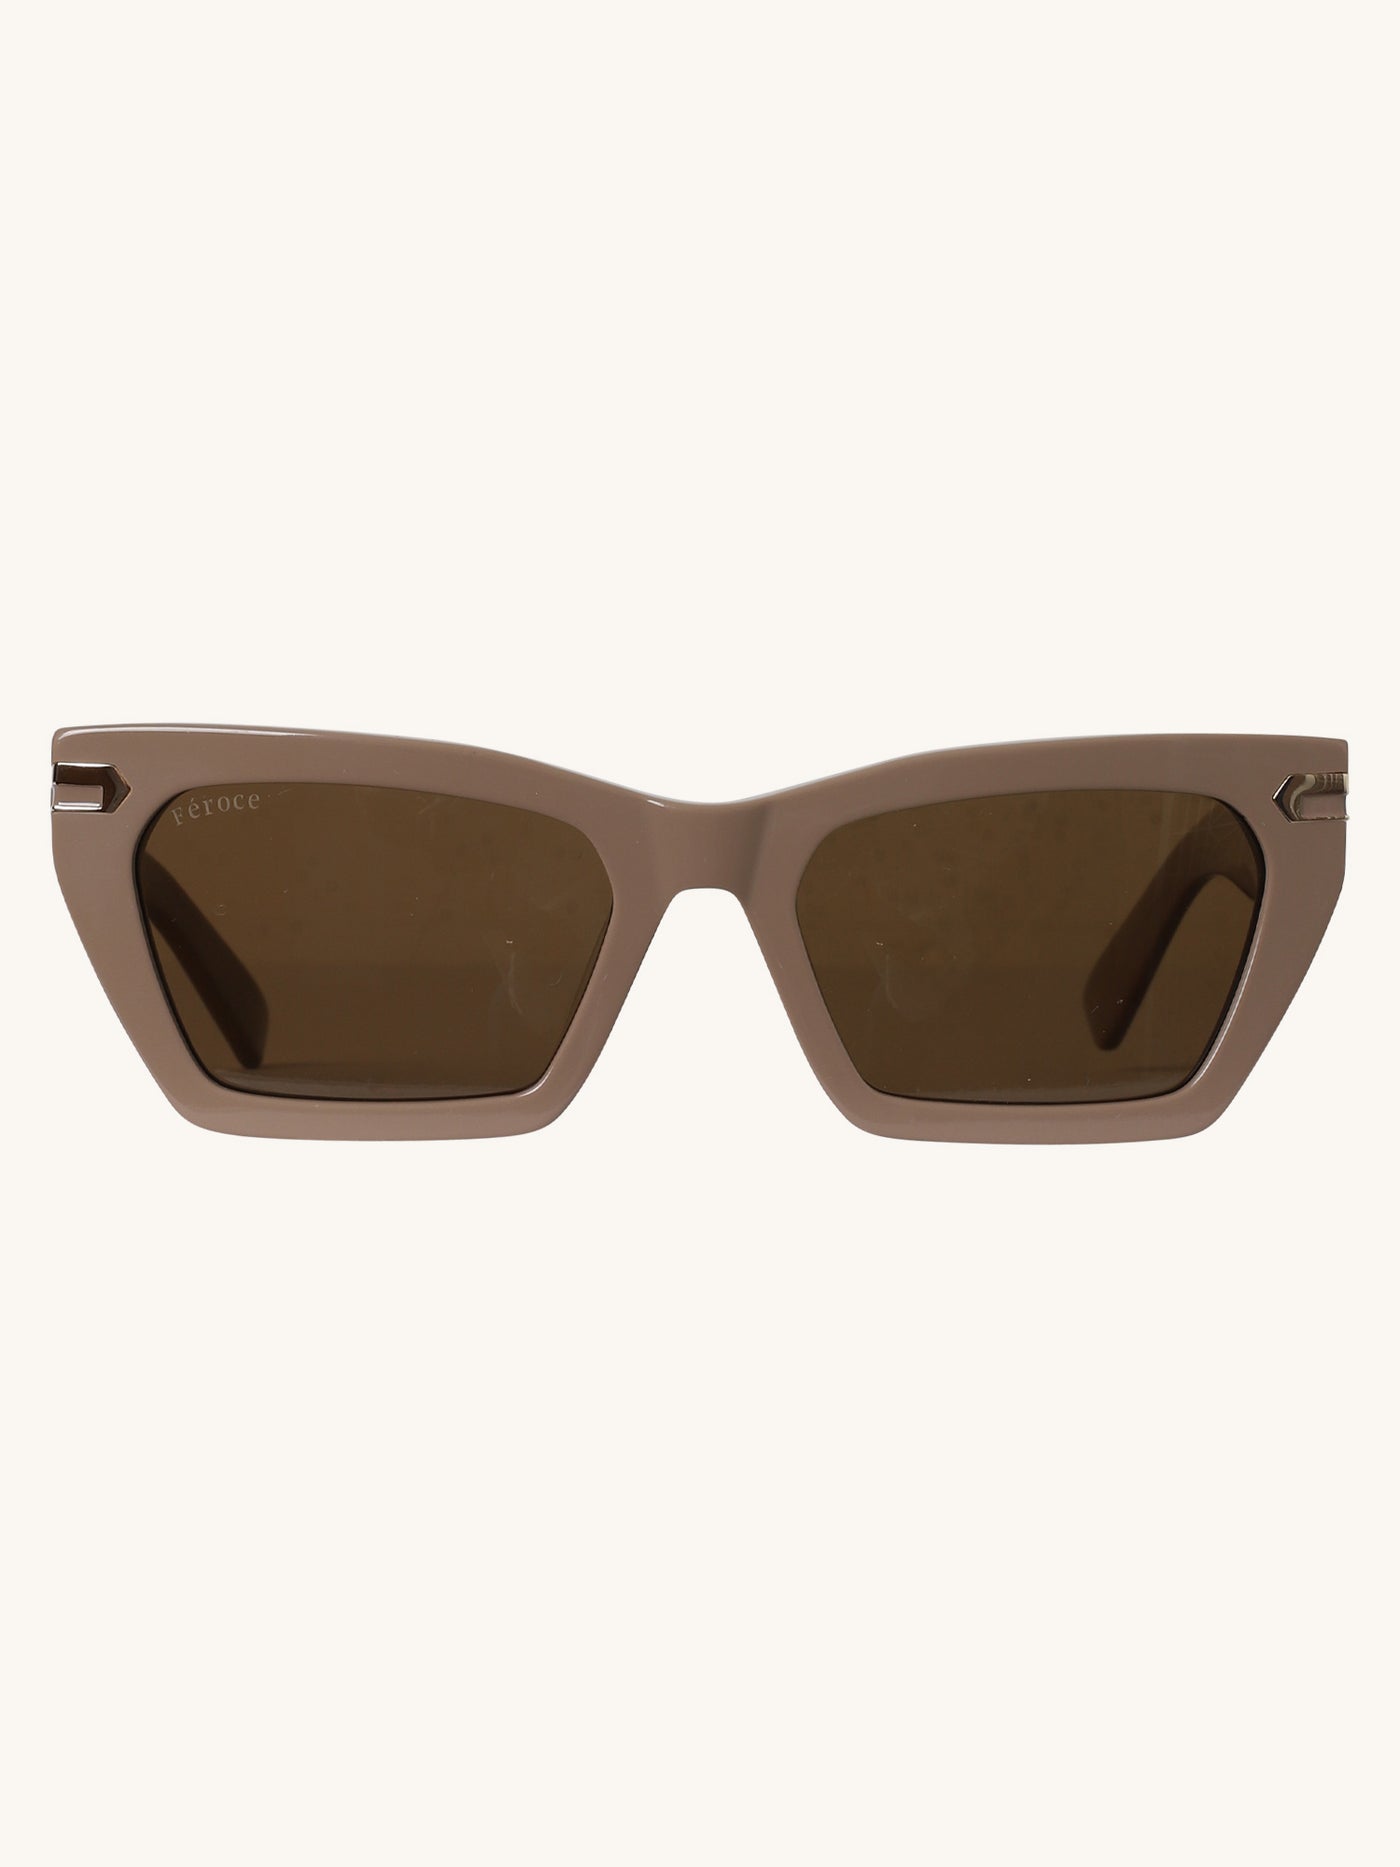 Heather Sunglasses in Rose Taupe